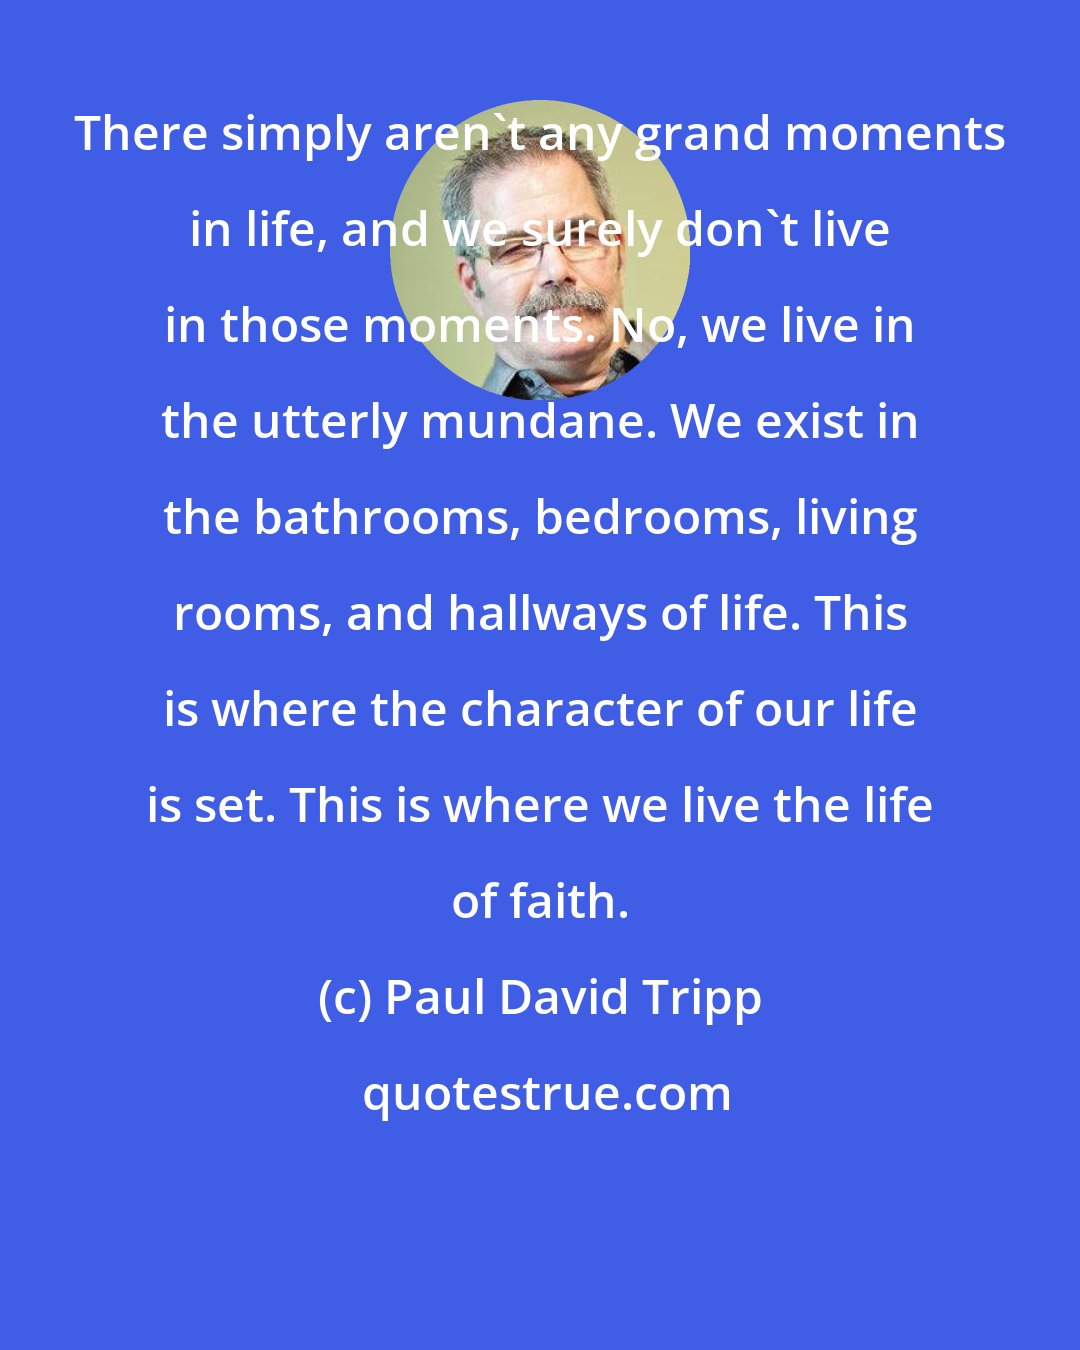 Paul David Tripp: There simply aren't any grand moments in life, and we surely don't live in those moments. No, we live in the utterly mundane. We exist in the bathrooms, bedrooms, living rooms, and hallways of life. This is where the character of our life is set. This is where we live the life of faith.